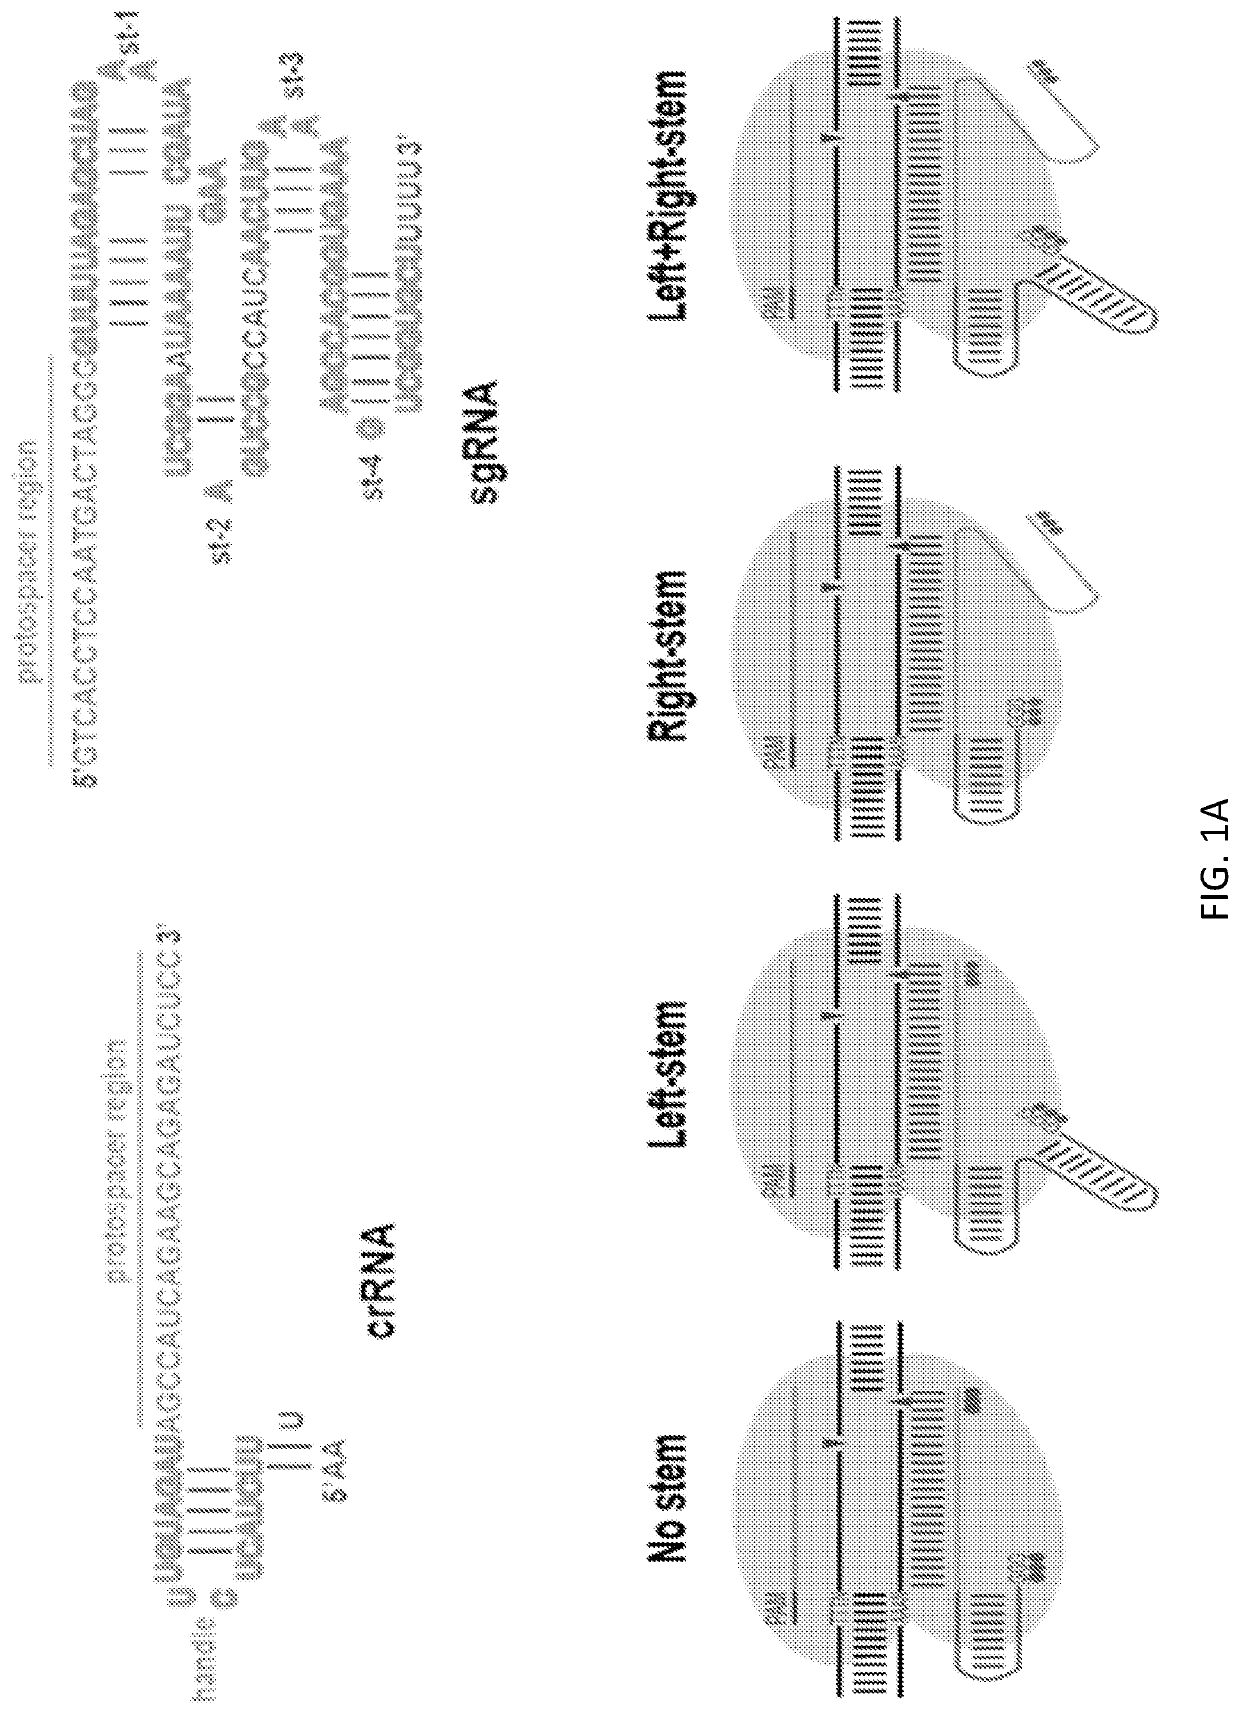 Compositions and Methods for Gene Editing in T cells using CRISPR/Cpf1